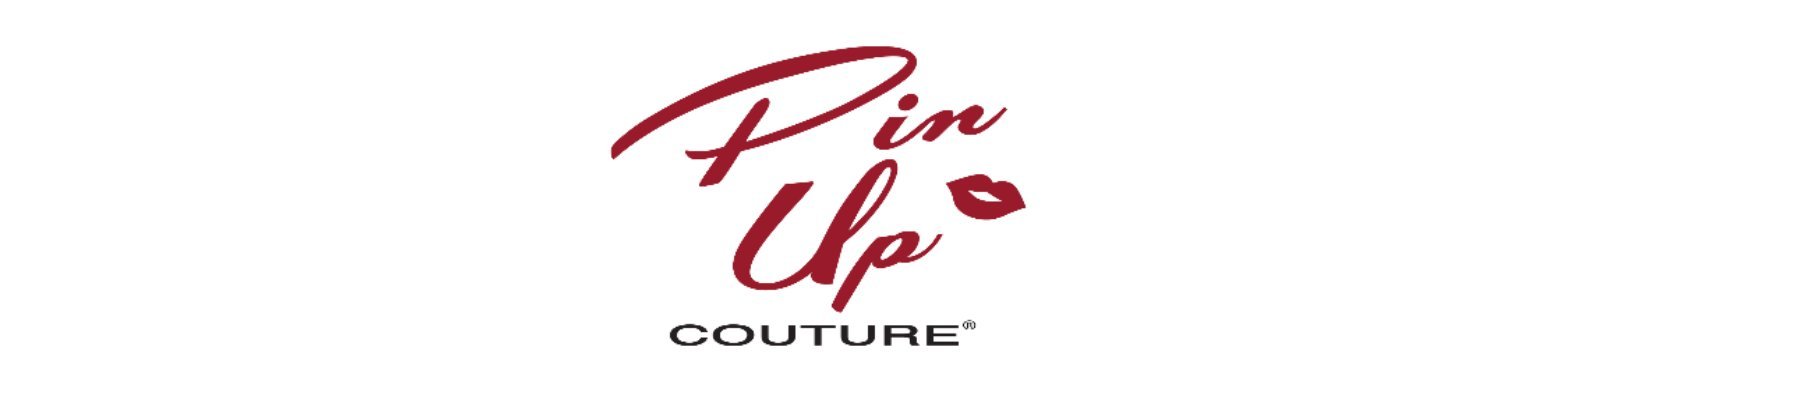 Pin Up Couture - Alternative Footwear